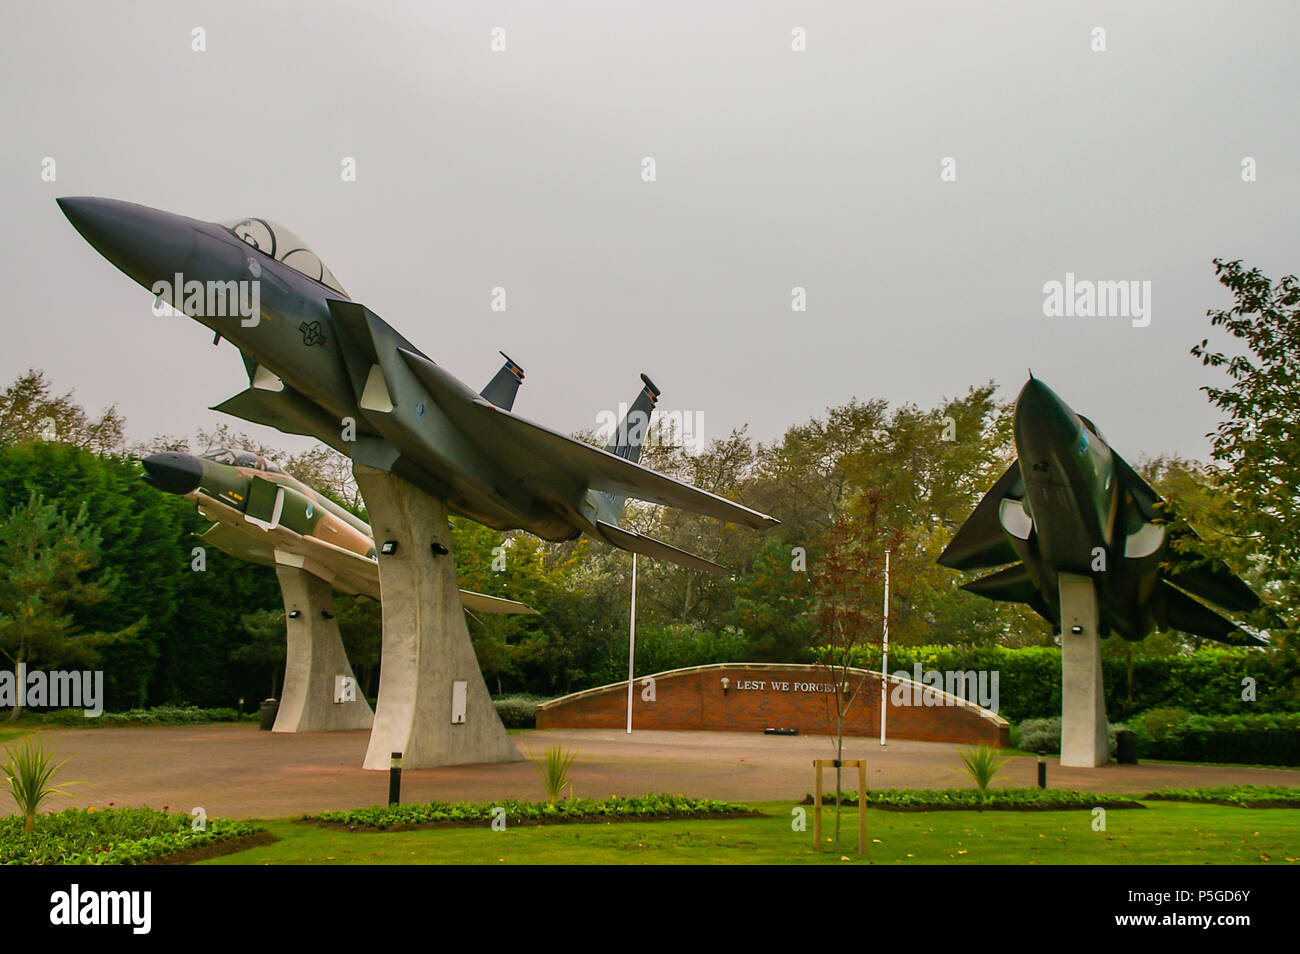 RAF Lakenheath USAF United States Air Force fighter jet plane base, Suffolk, UK. Liberty Wing Memorial Park. F-4, F-15, F-111 aircraft on plinths Stock Photo